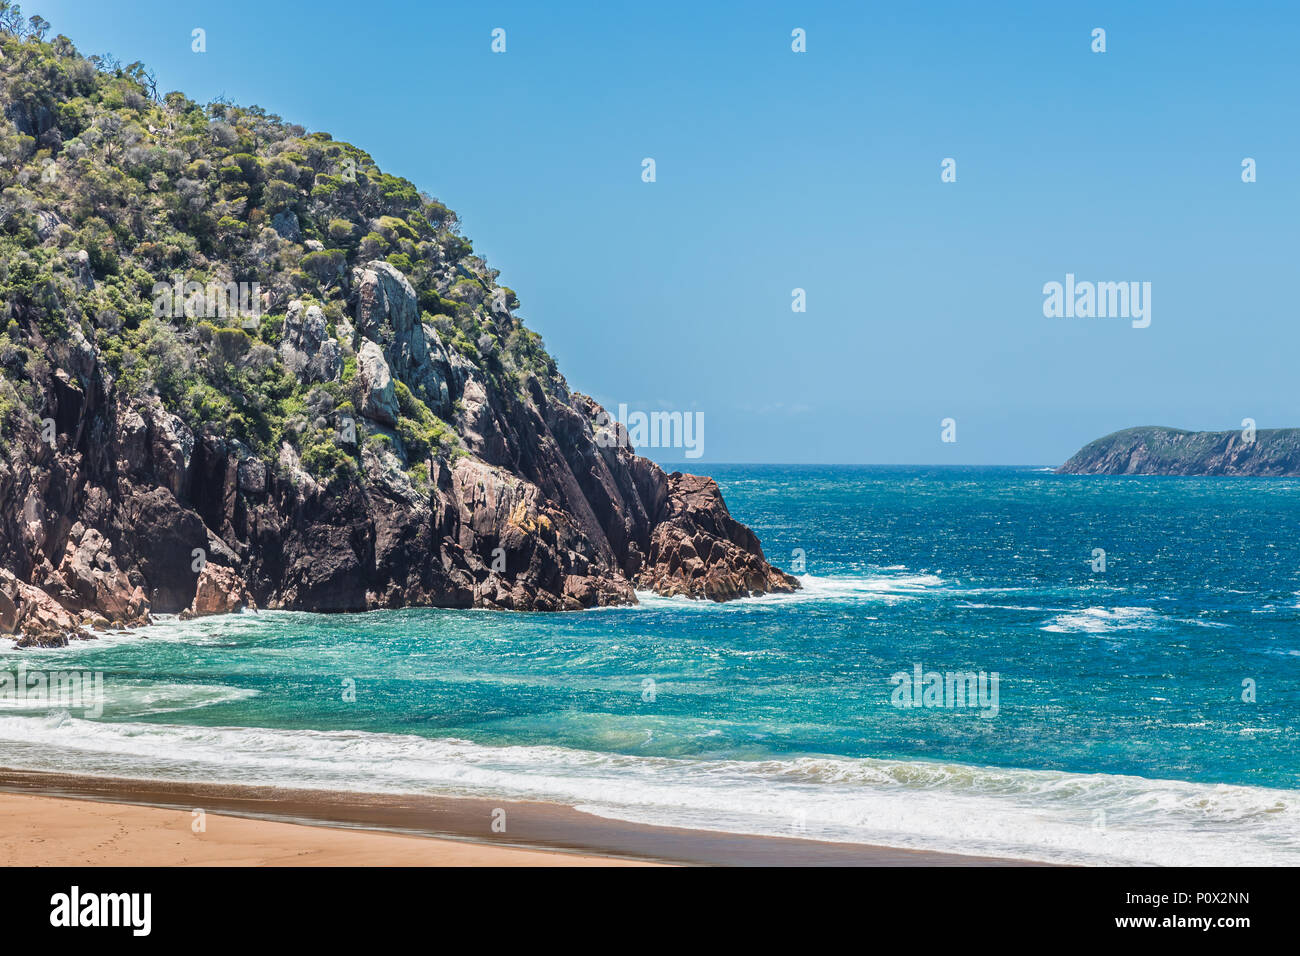 View of Zenith Beach, Port Stephens, NSW, Australia, showing the rocky outcrop, and the outlet to the open sea. Stock Photo